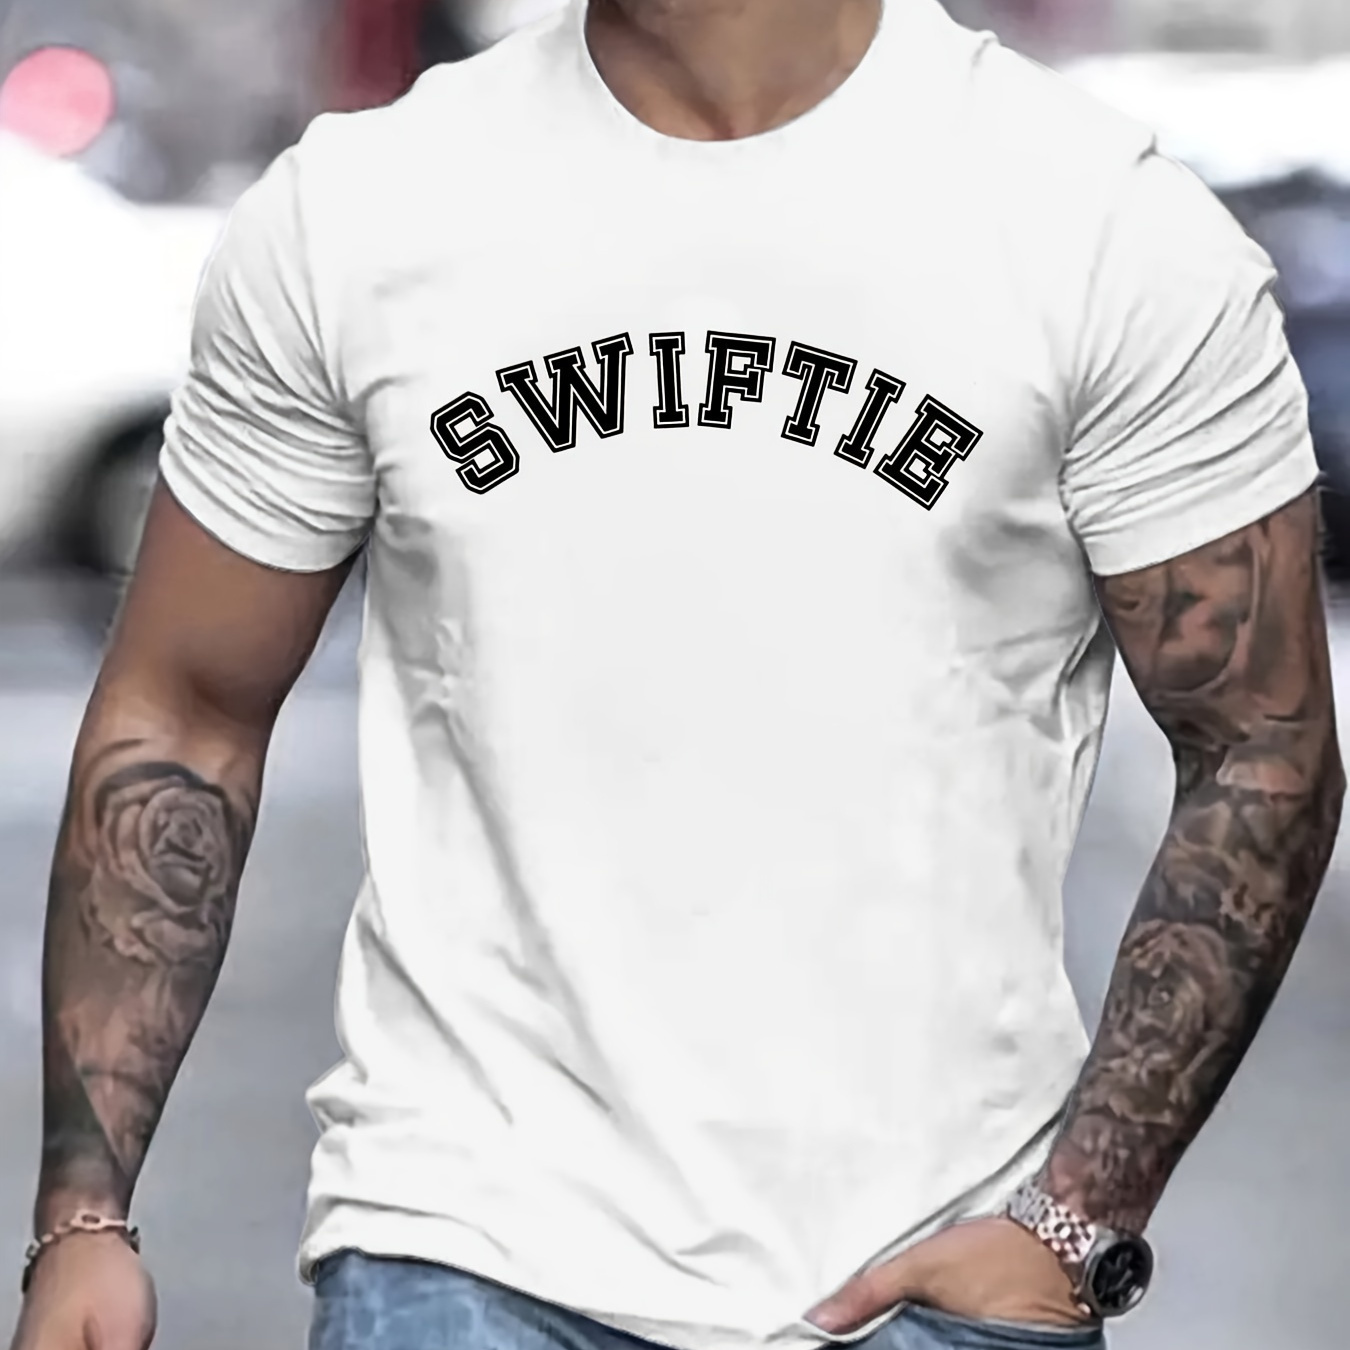 

Swiftie Print, Men's Novel Graphic Design T-shirt, Casual Comfy Tees For Summer, Men's Clothing Tops For Daily Activities